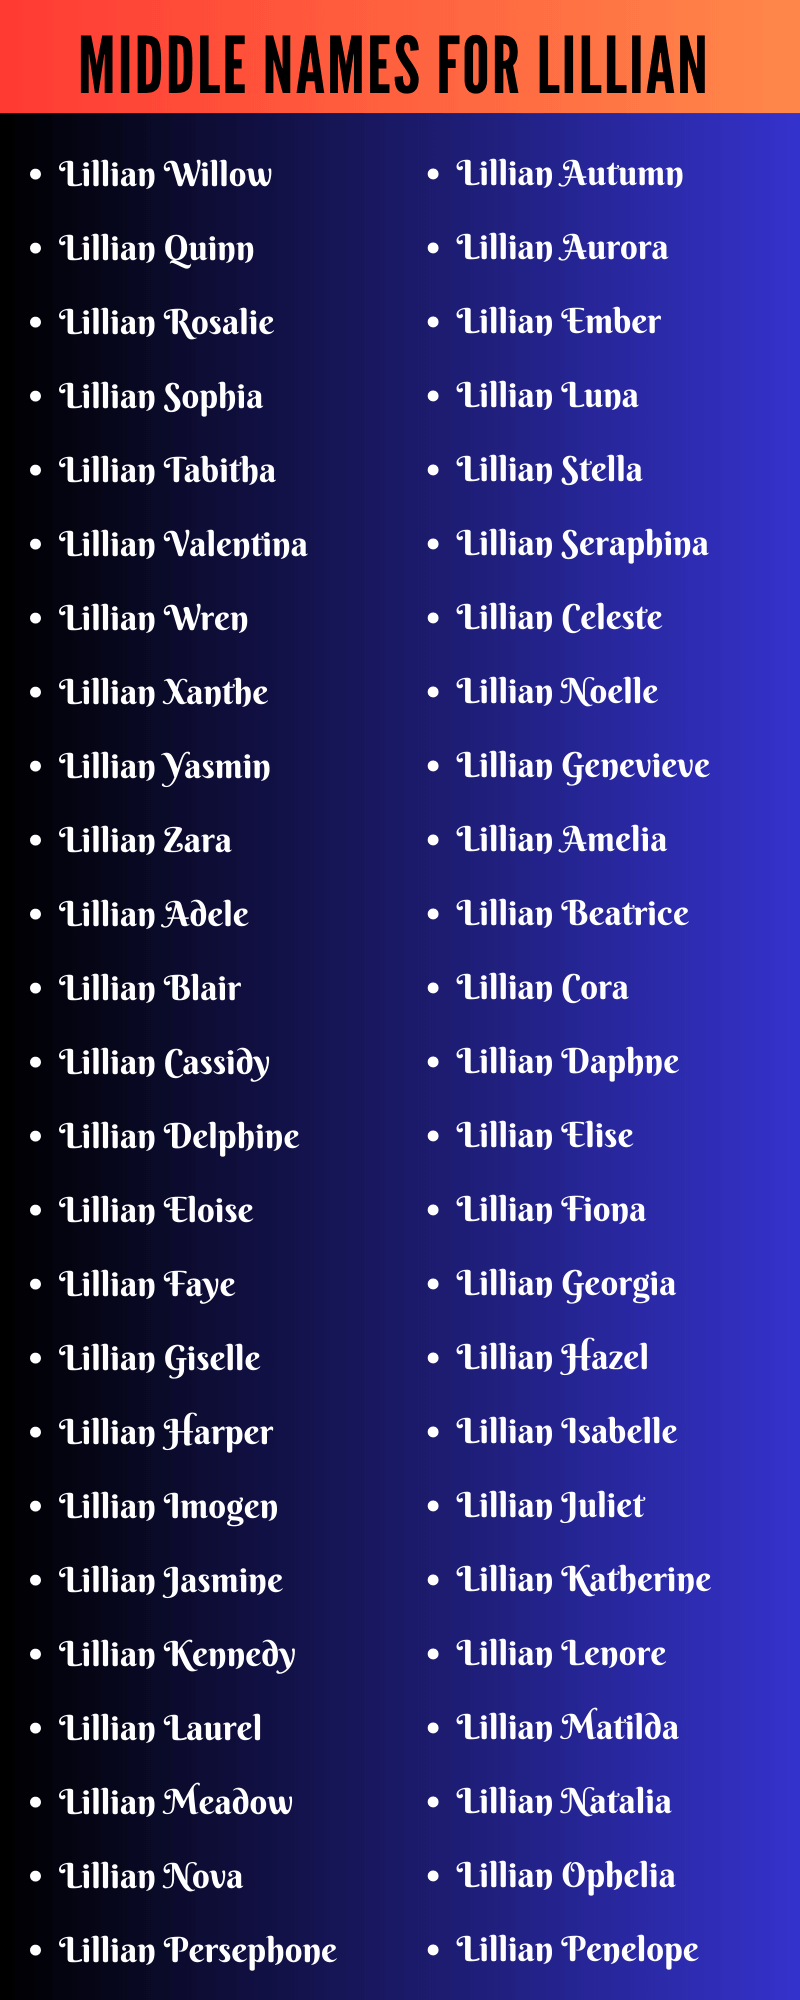 Middle Names For Lillian